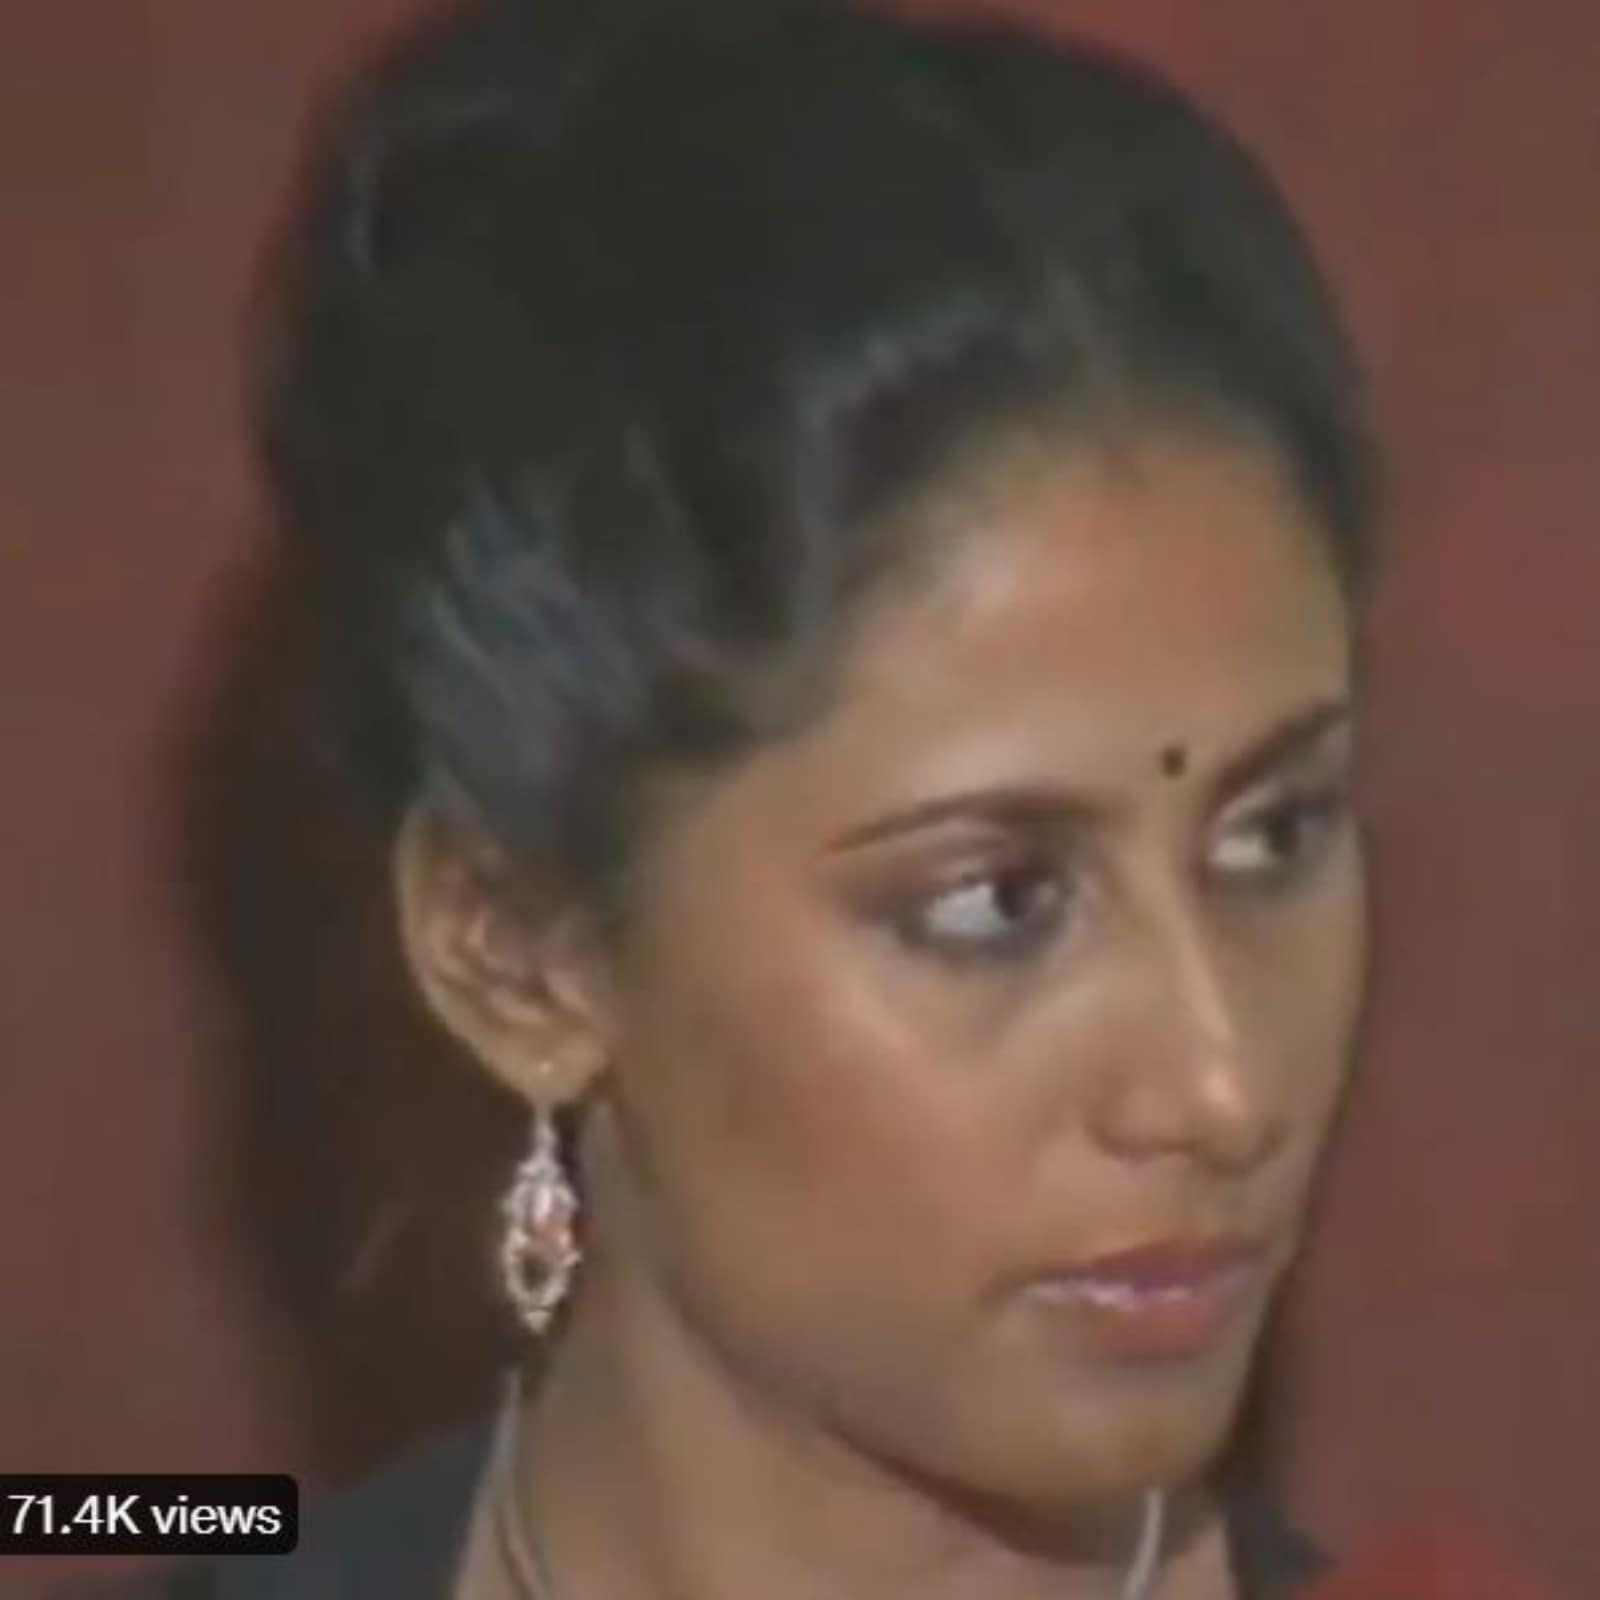 Purani Heroine Nangi Sex - Smita Patil's Old Interview on Objectification of Women to 'Sell Films' is  Still Relevant